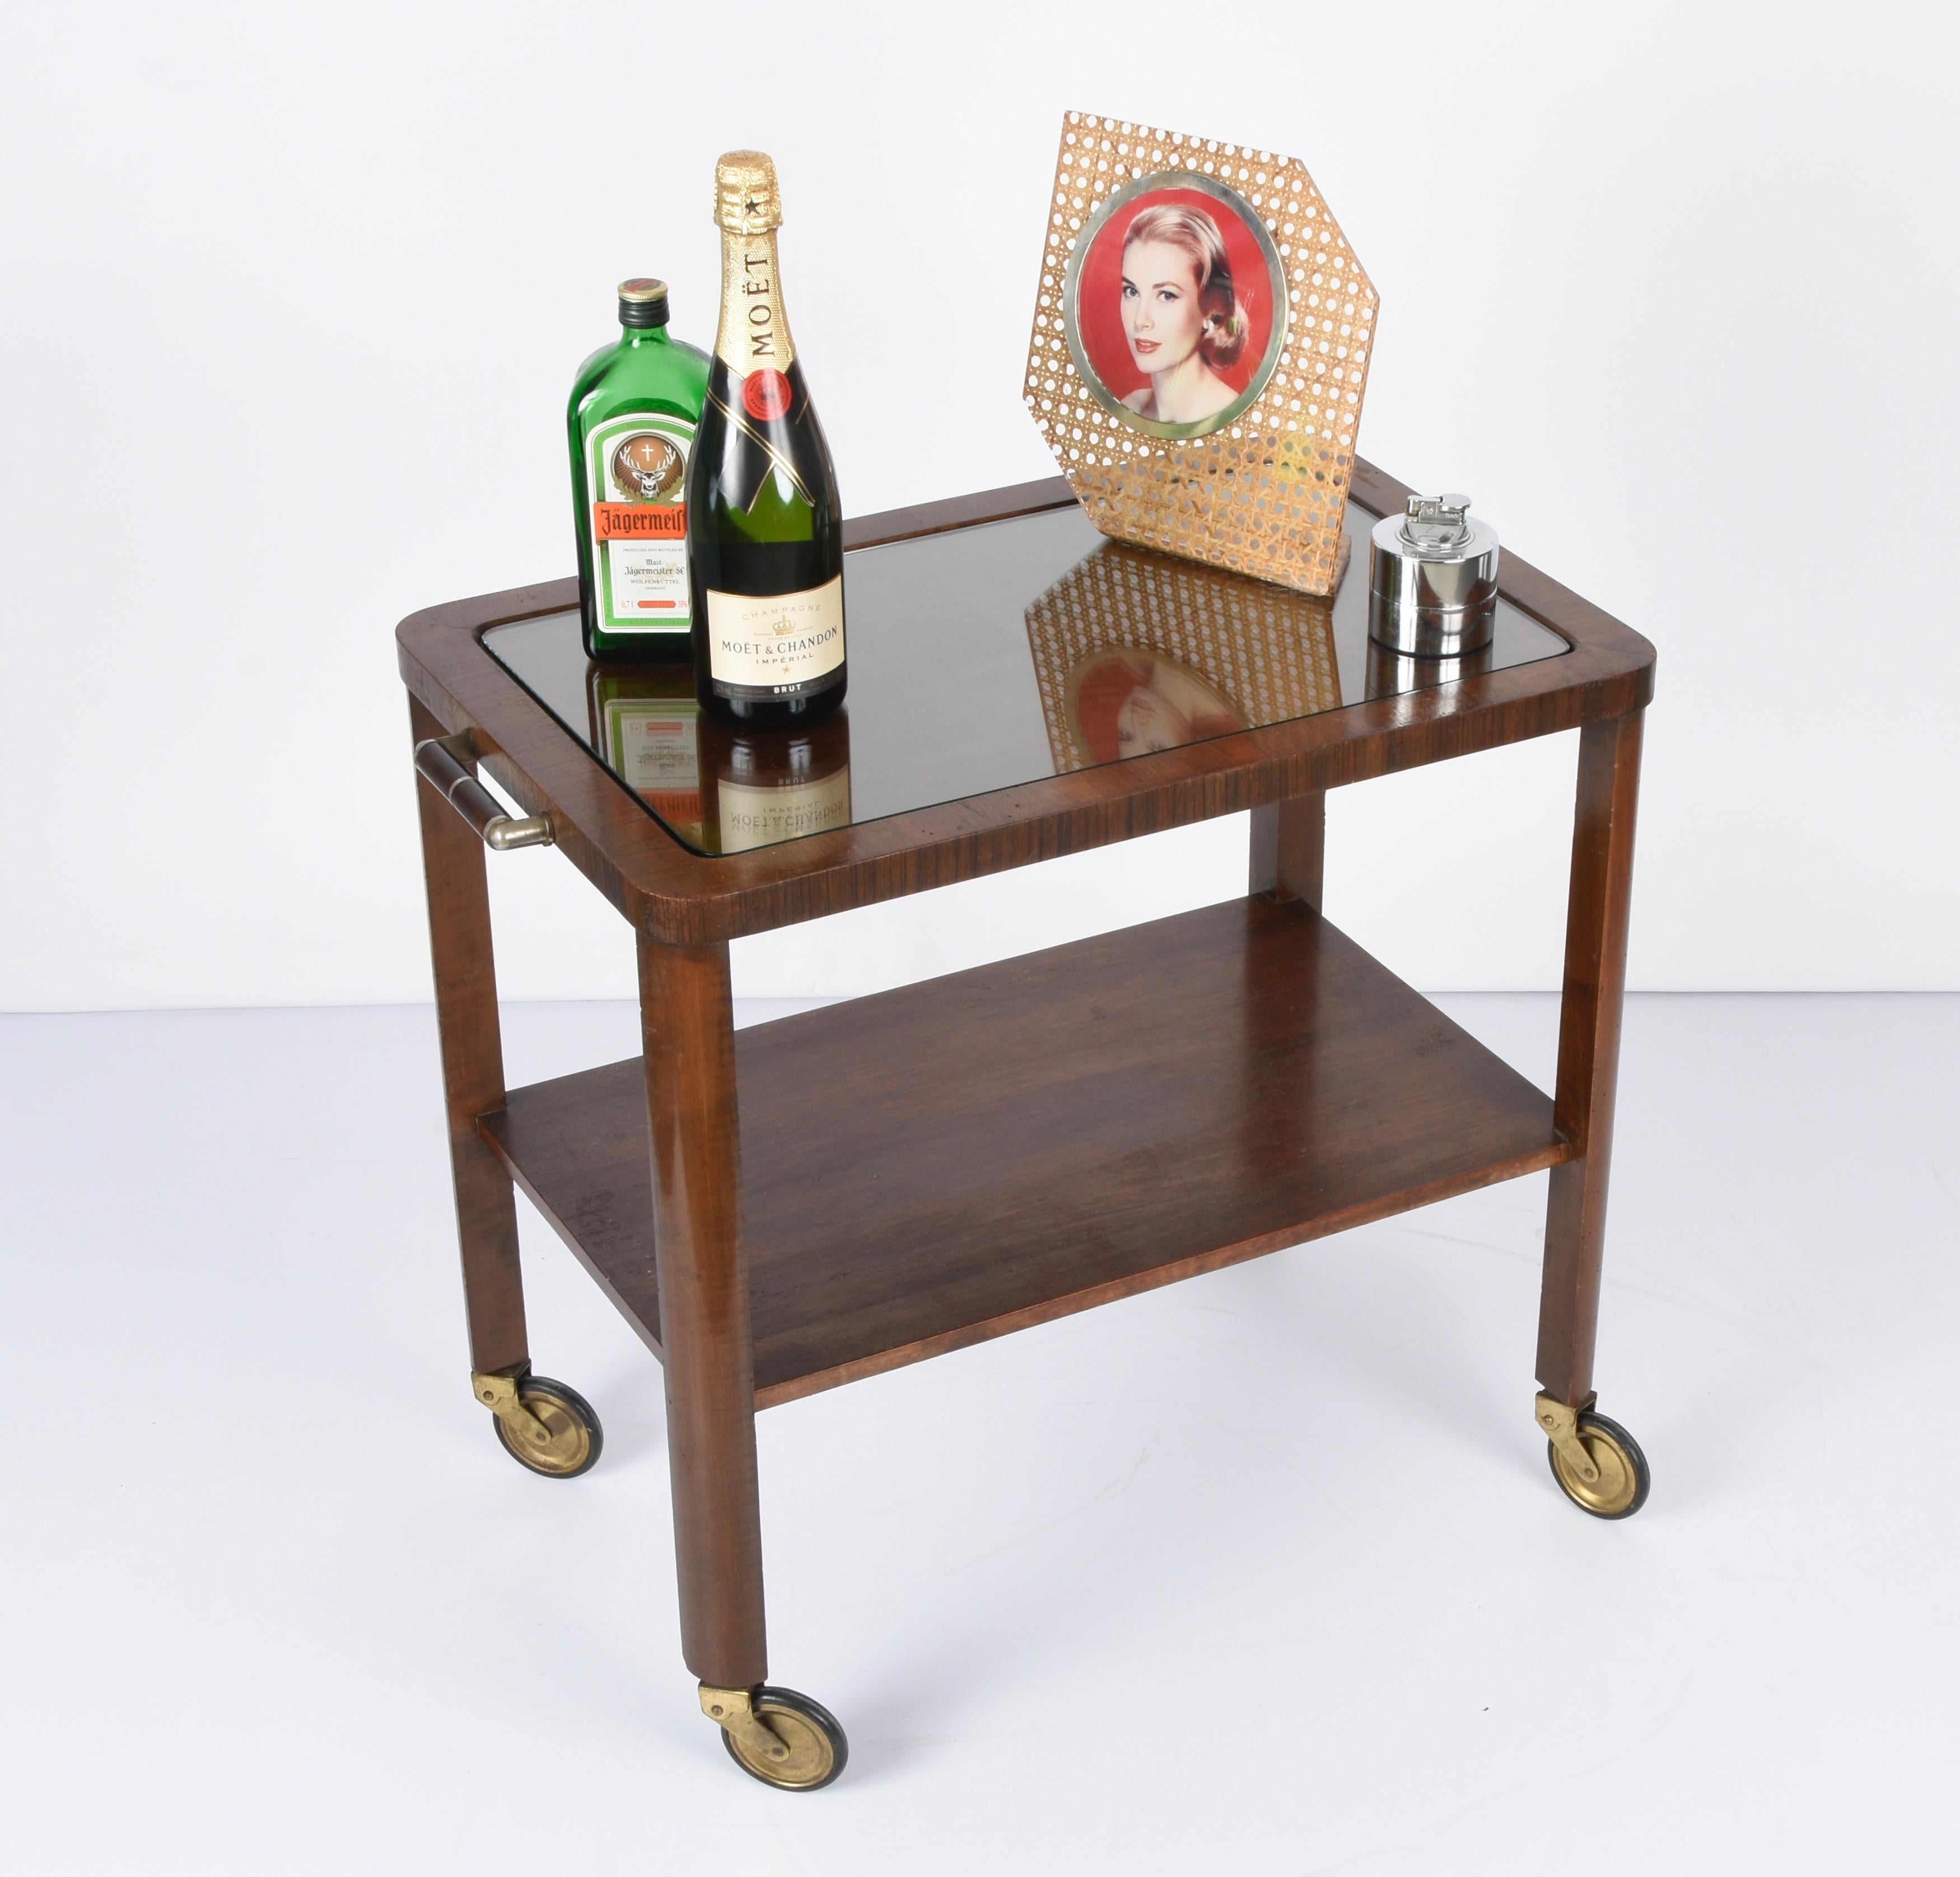 Art Deco Solid Walnut Wood and Glass Two-Levels Italian Trolley Bar Cart, 1940s For Sale 9